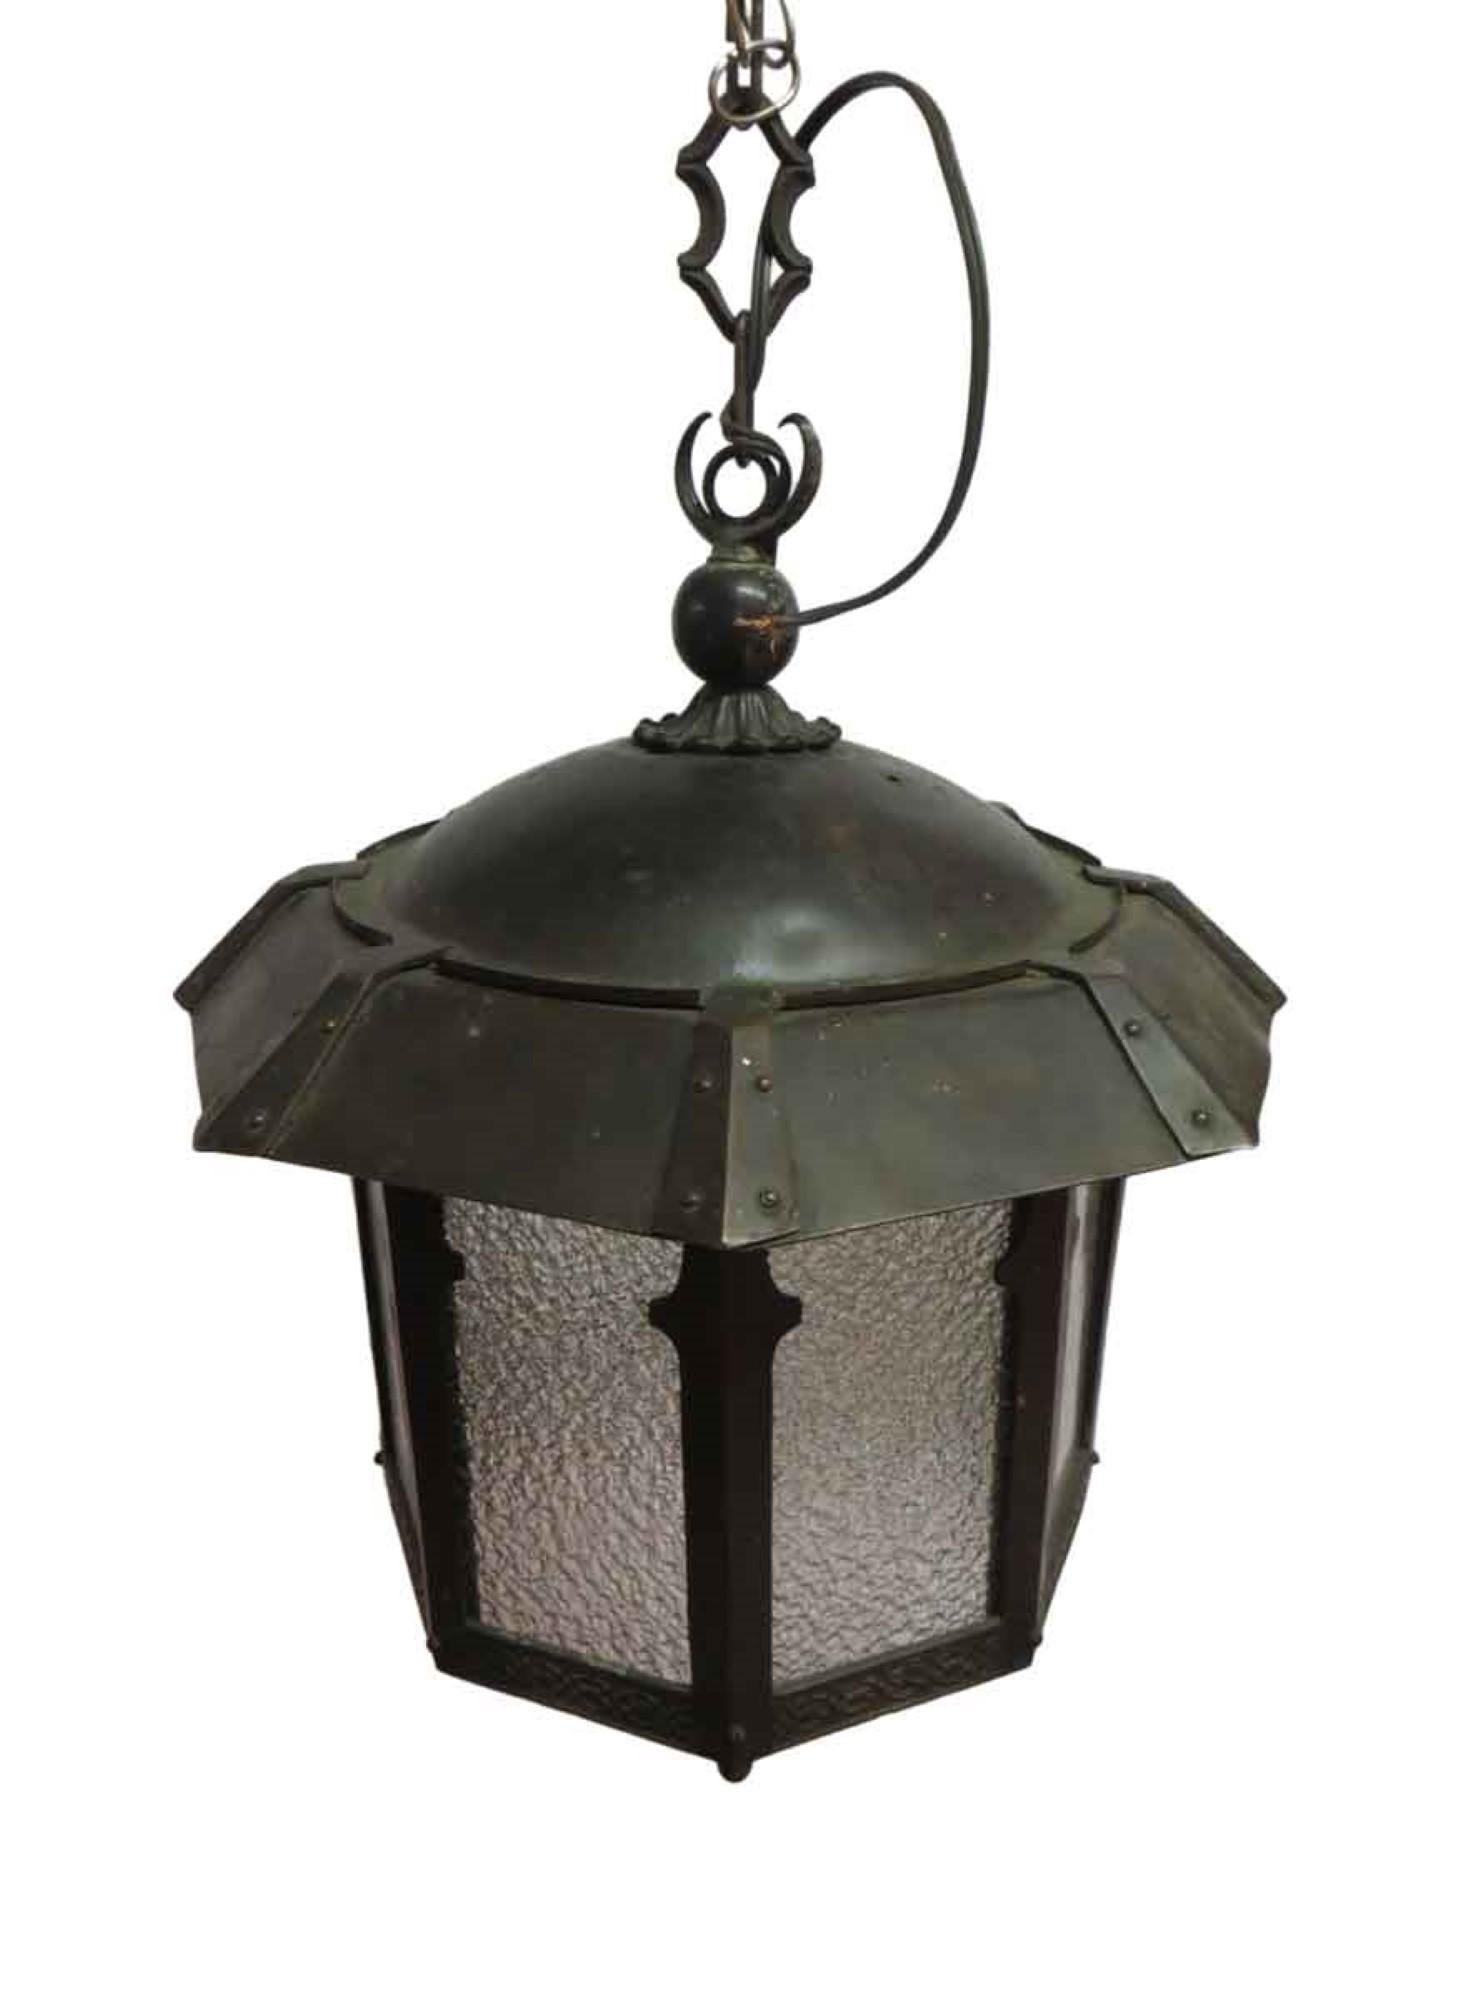 1910s Arts & Crafts copper pendant lantern with hand hammered details and textured glass commonly used in a foyer or small area. This is missing two small finials at the bottom. Pictured here as is. Price includes restoration. This can be seen at